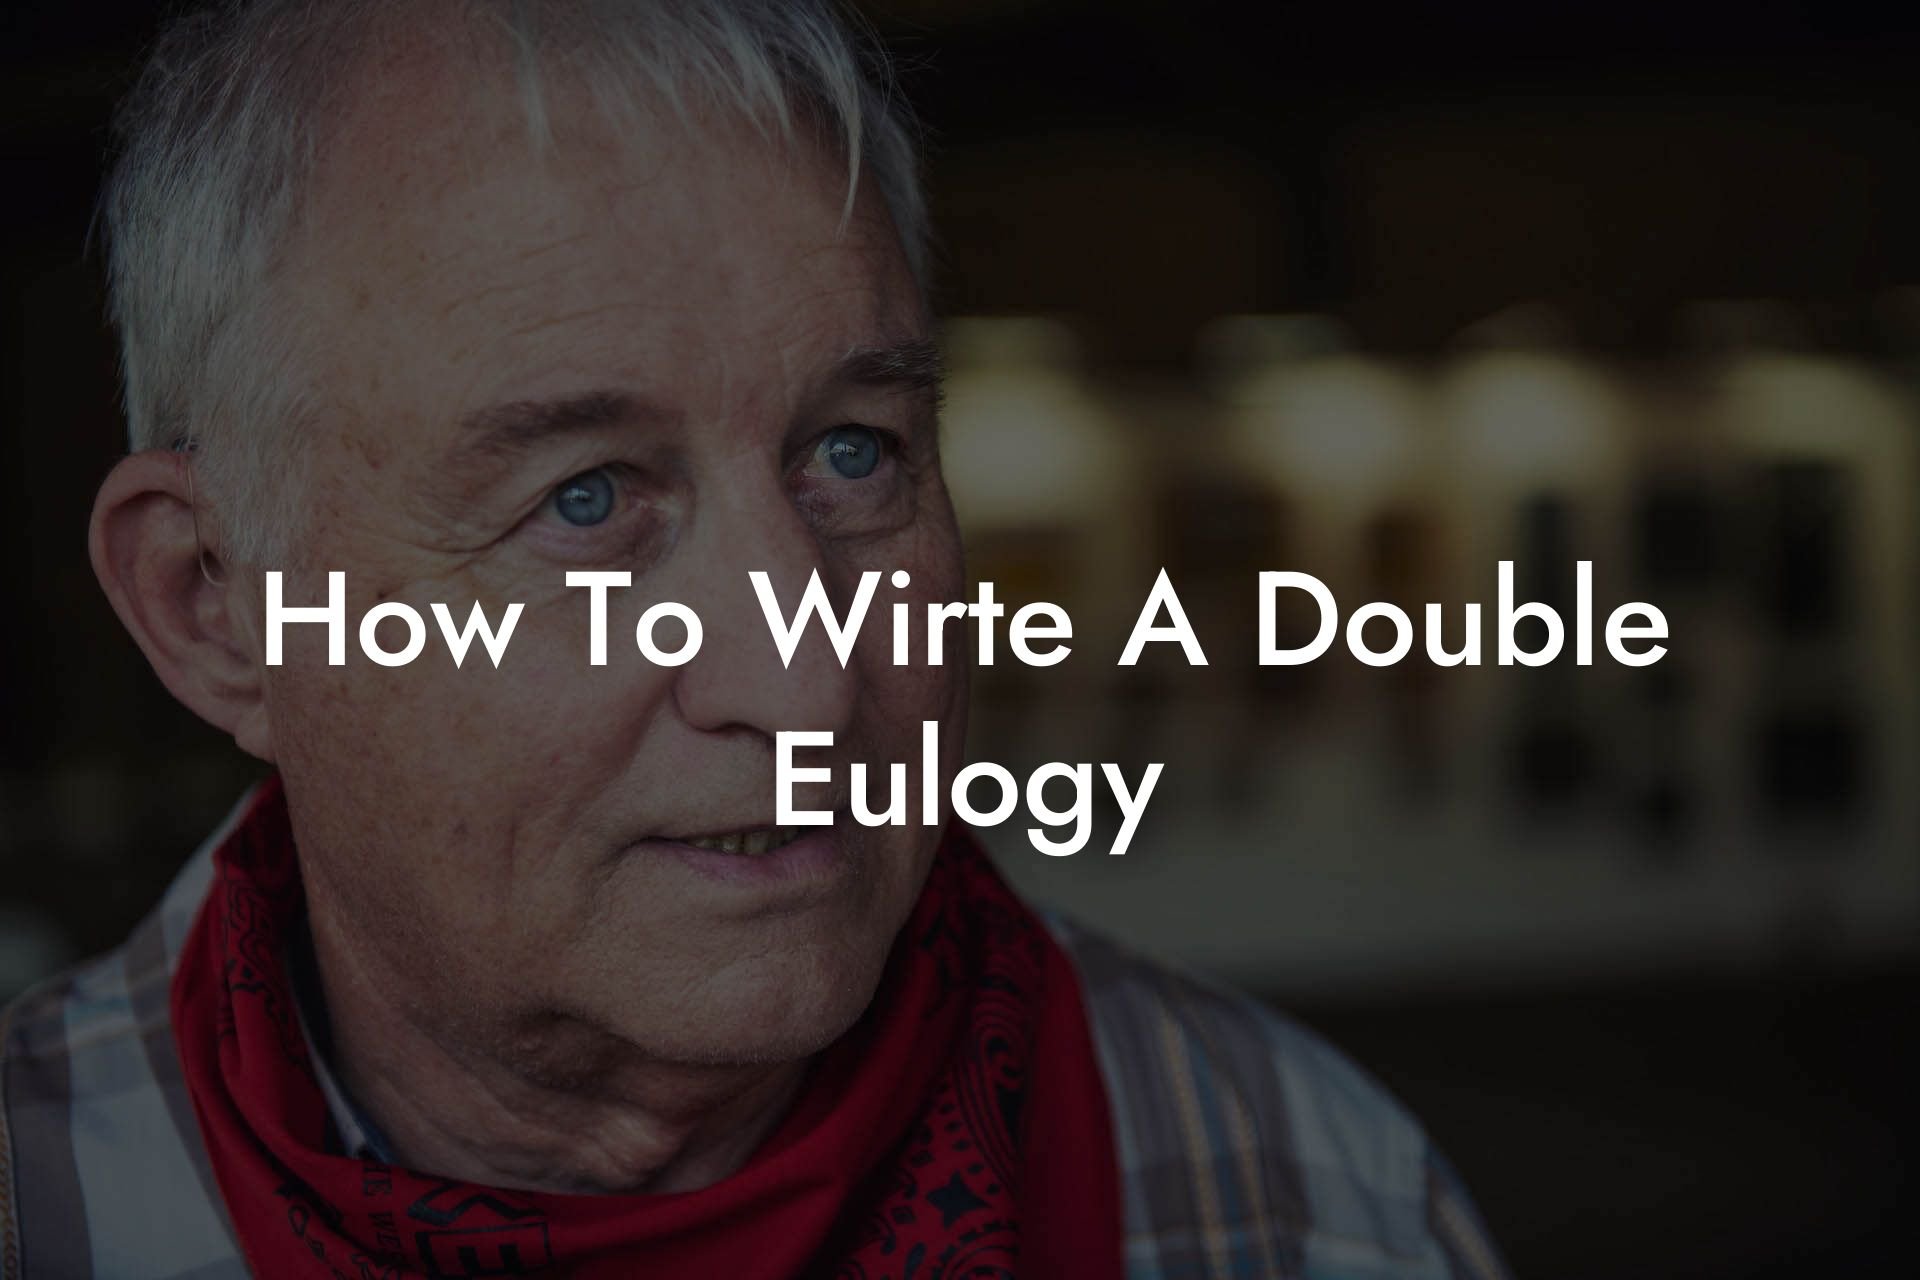 How To Wirte A Double Eulogy